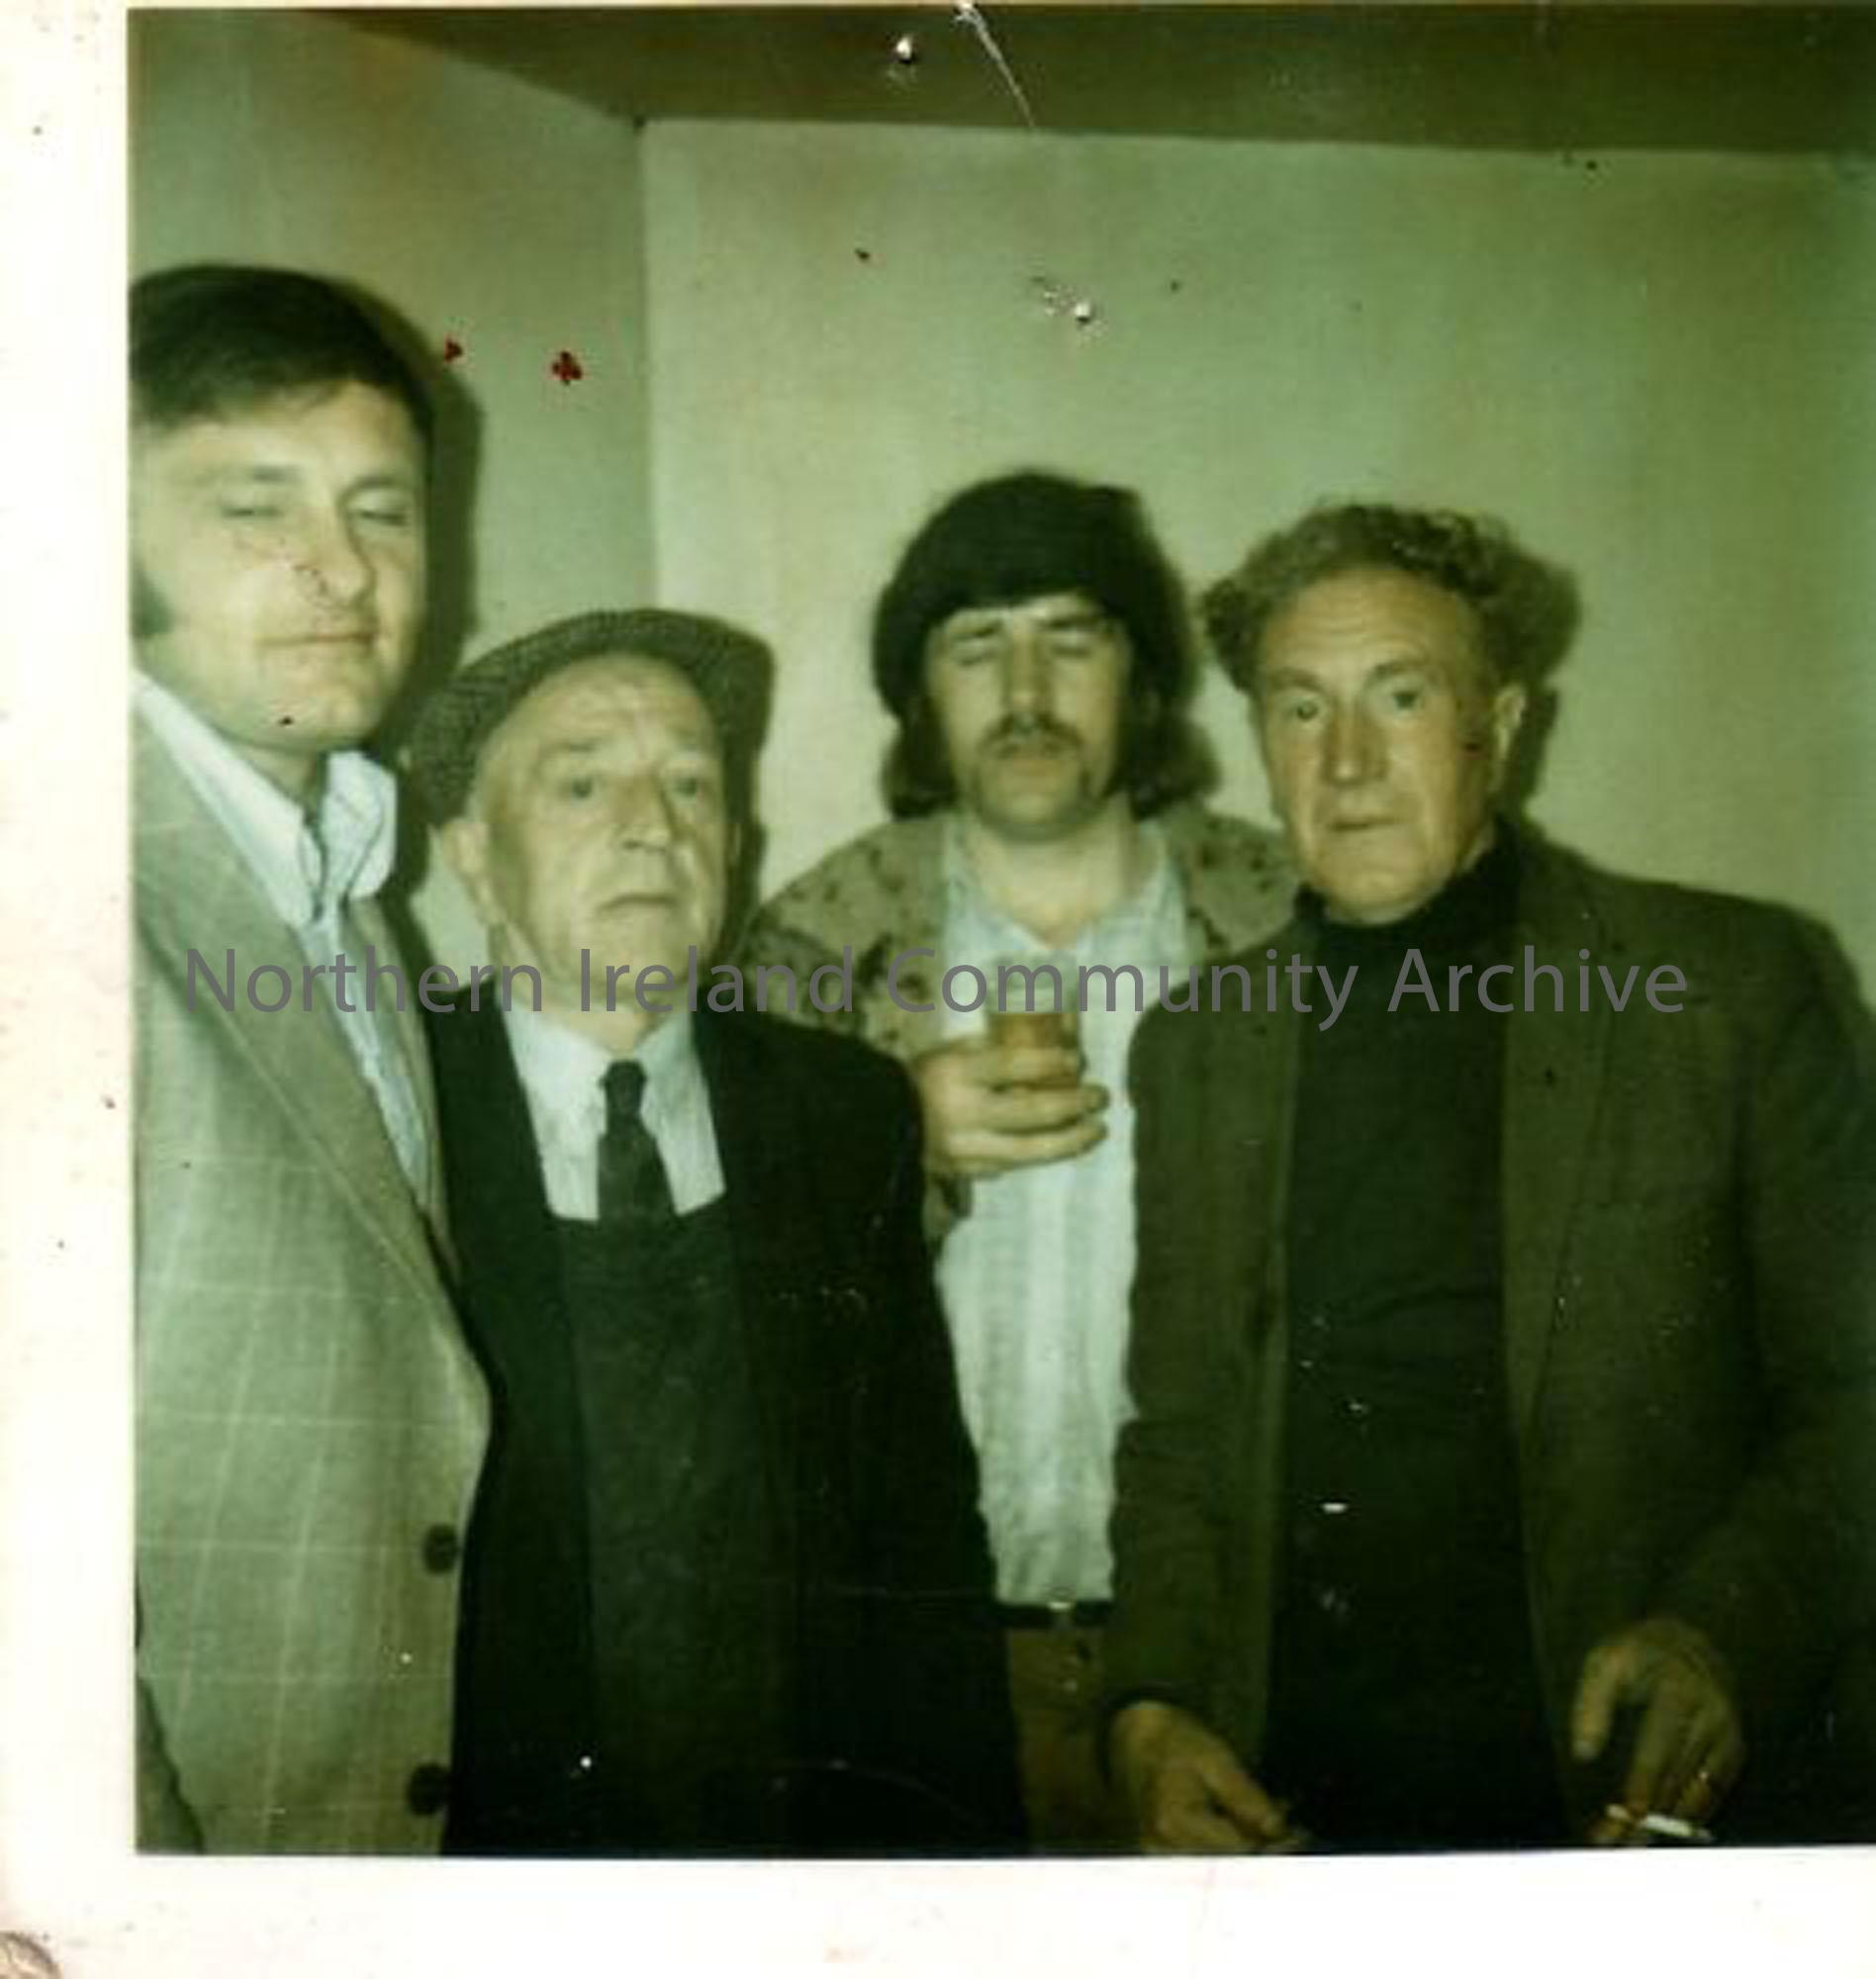 Graham McCaw, his uncle Alec McCaw, his cousin David McCaw and George King enjoying a social evening in Paddy’s Back Room (5737)